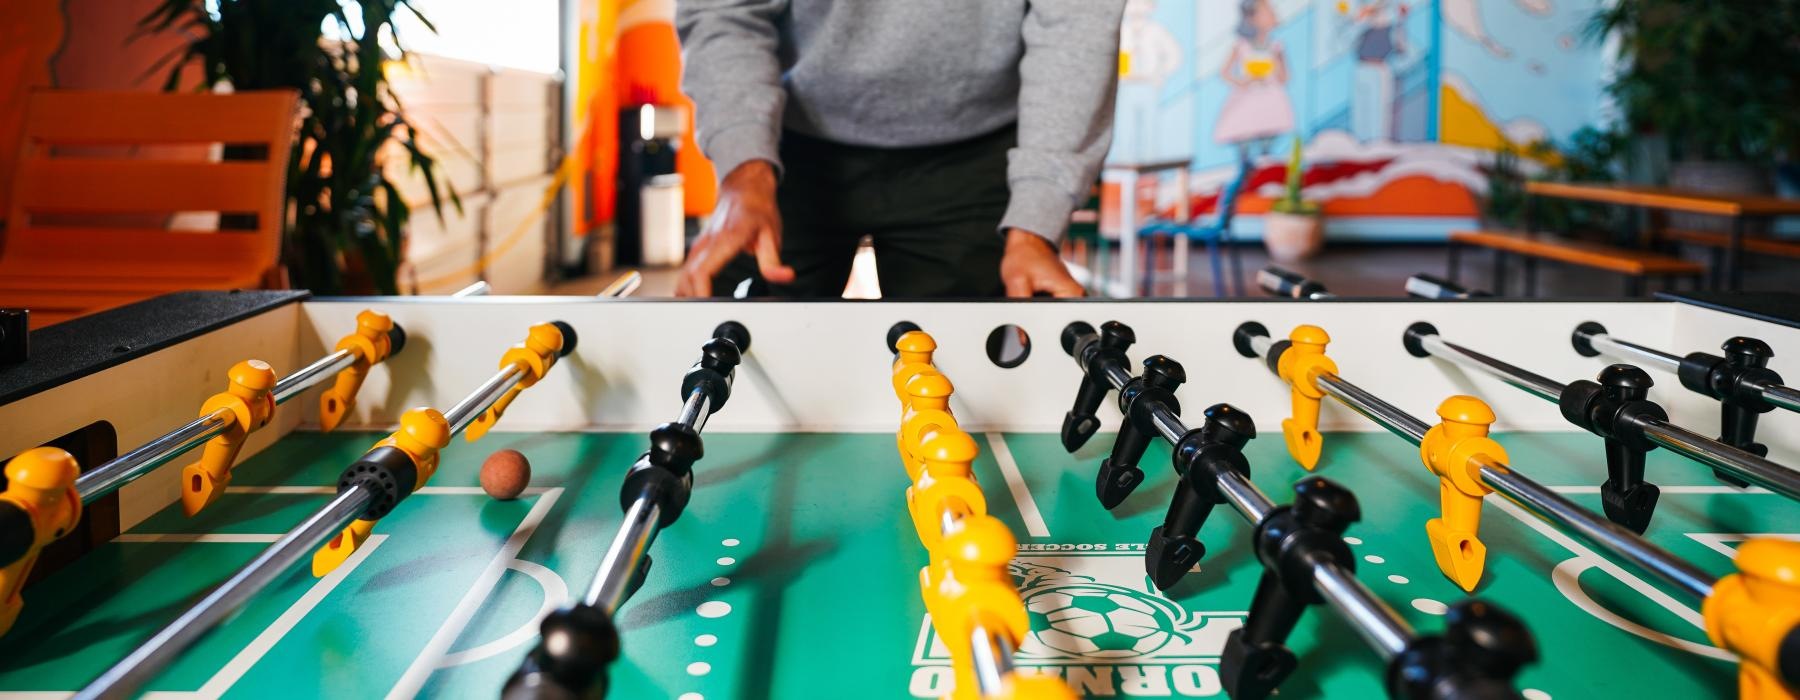 a person playing foosball